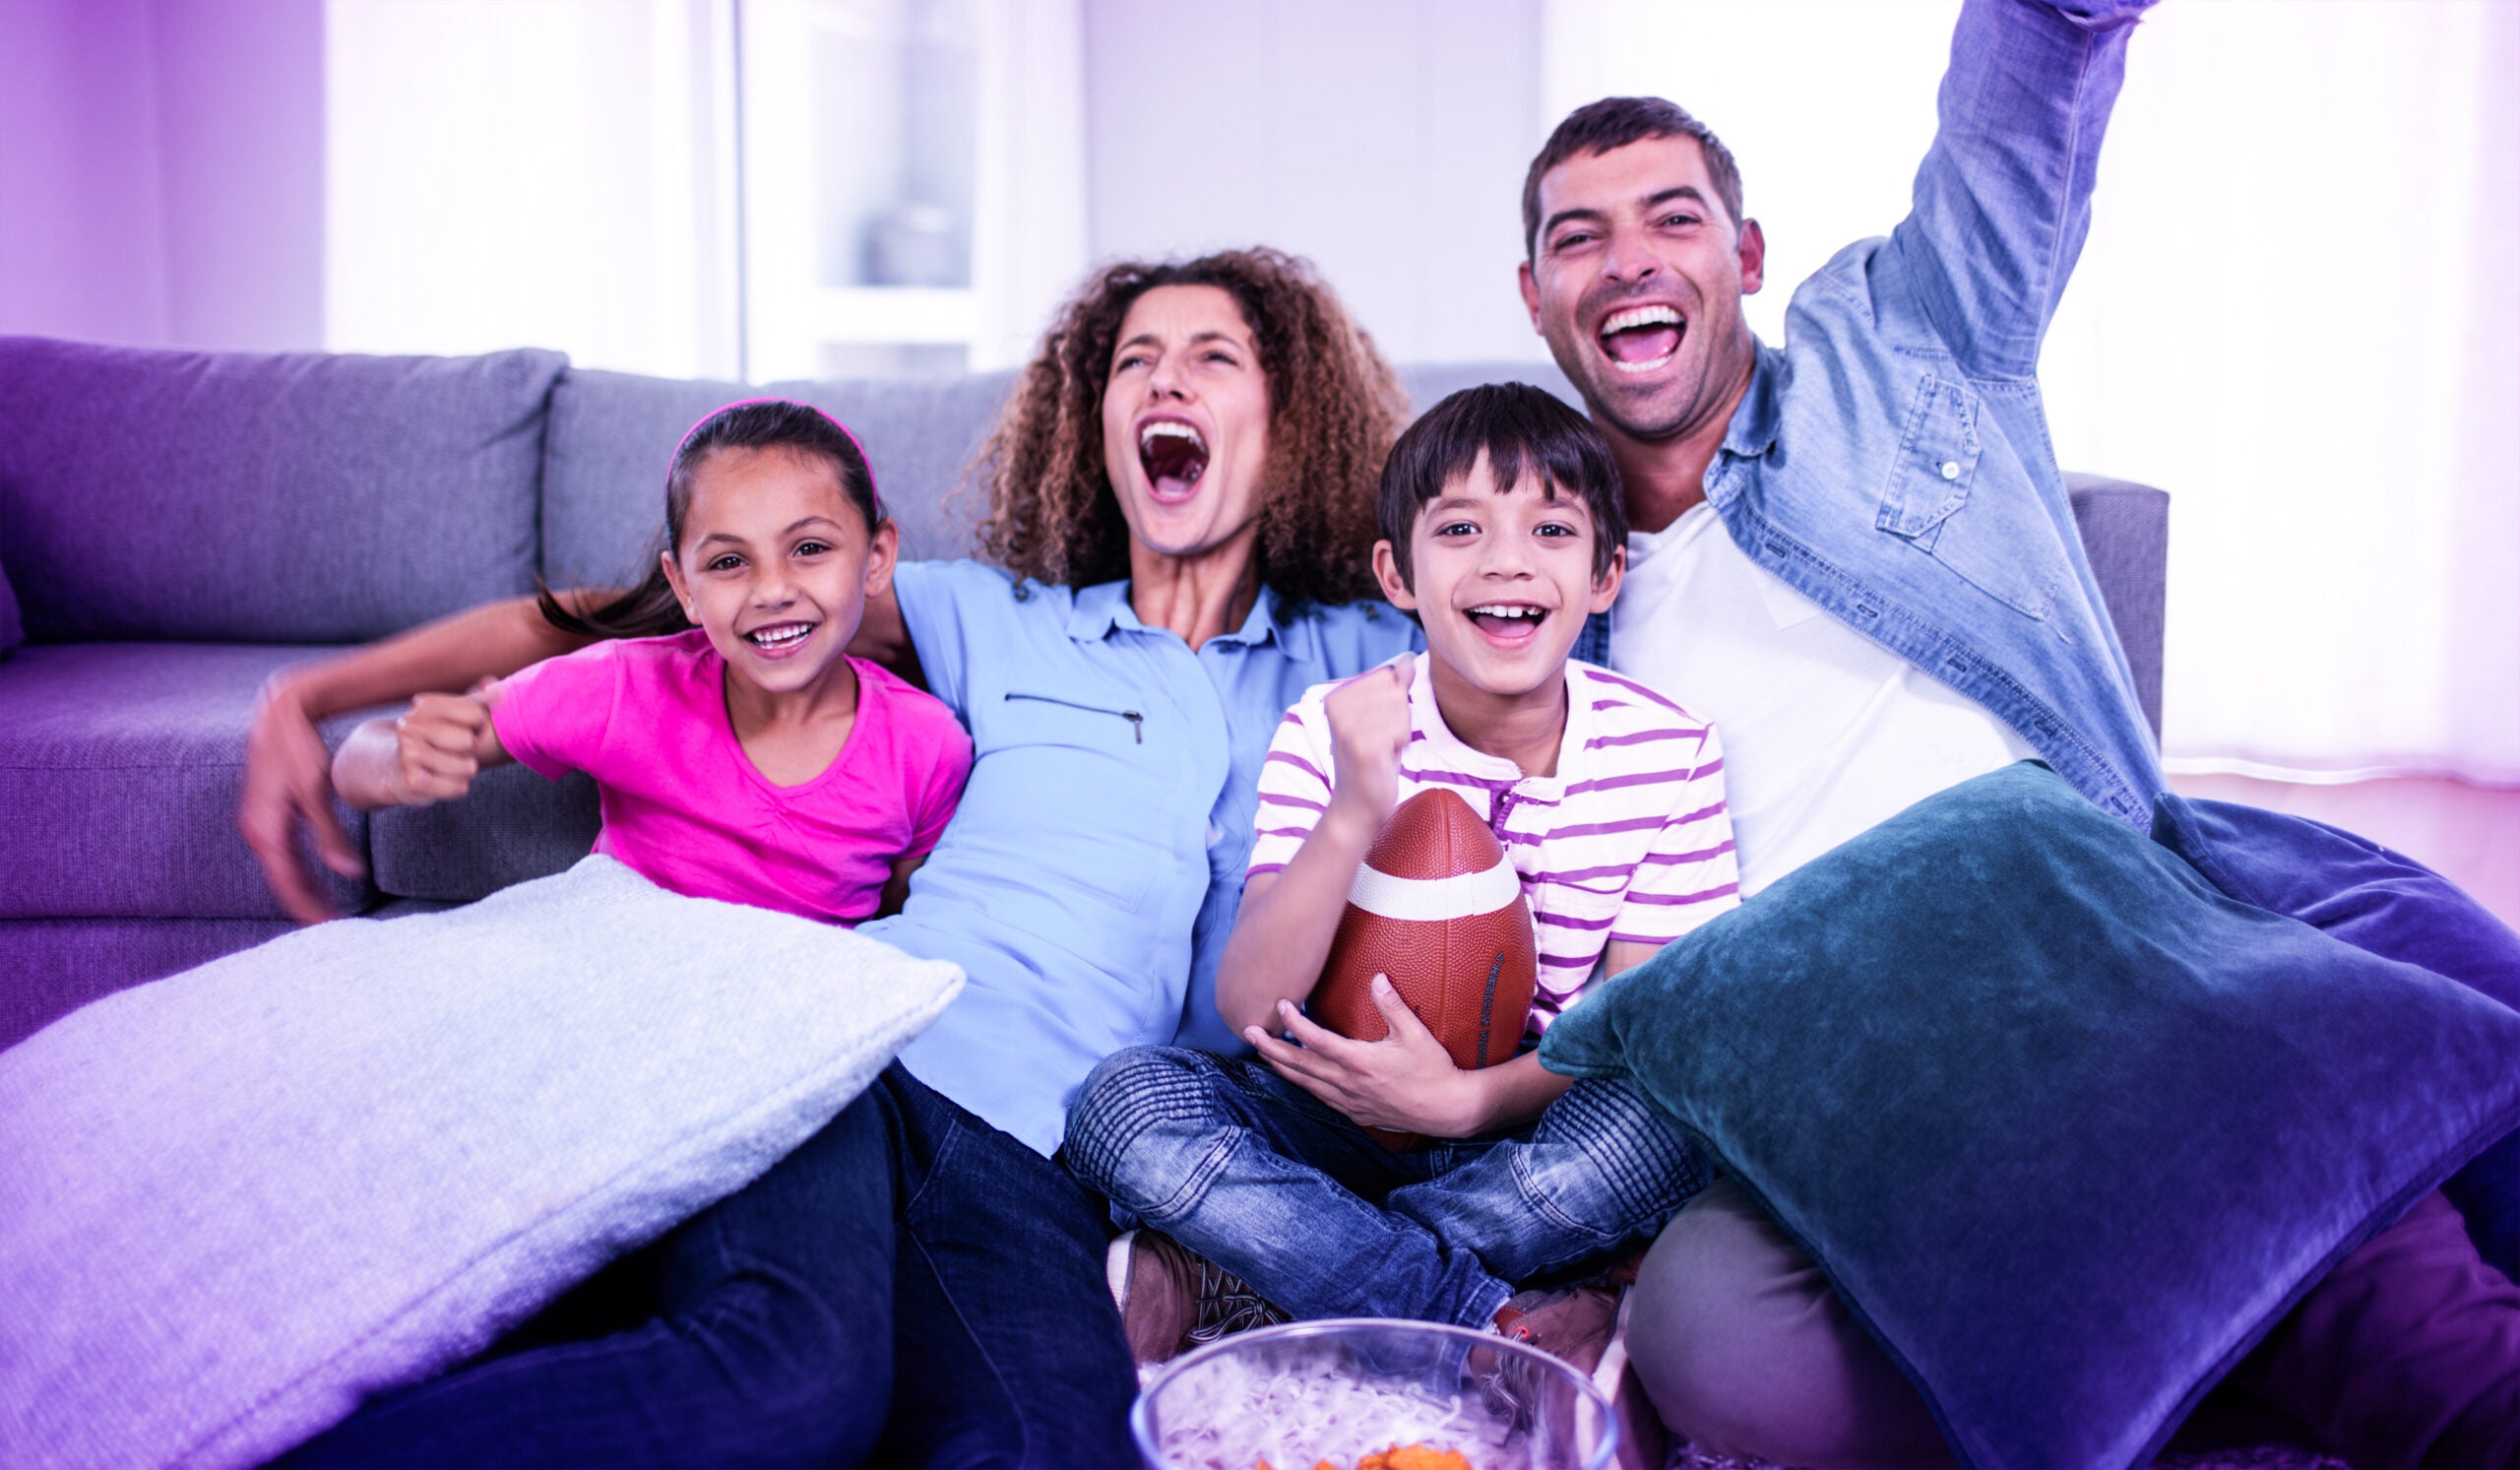 How to Host a Football Watch Party—the Smart Home Way